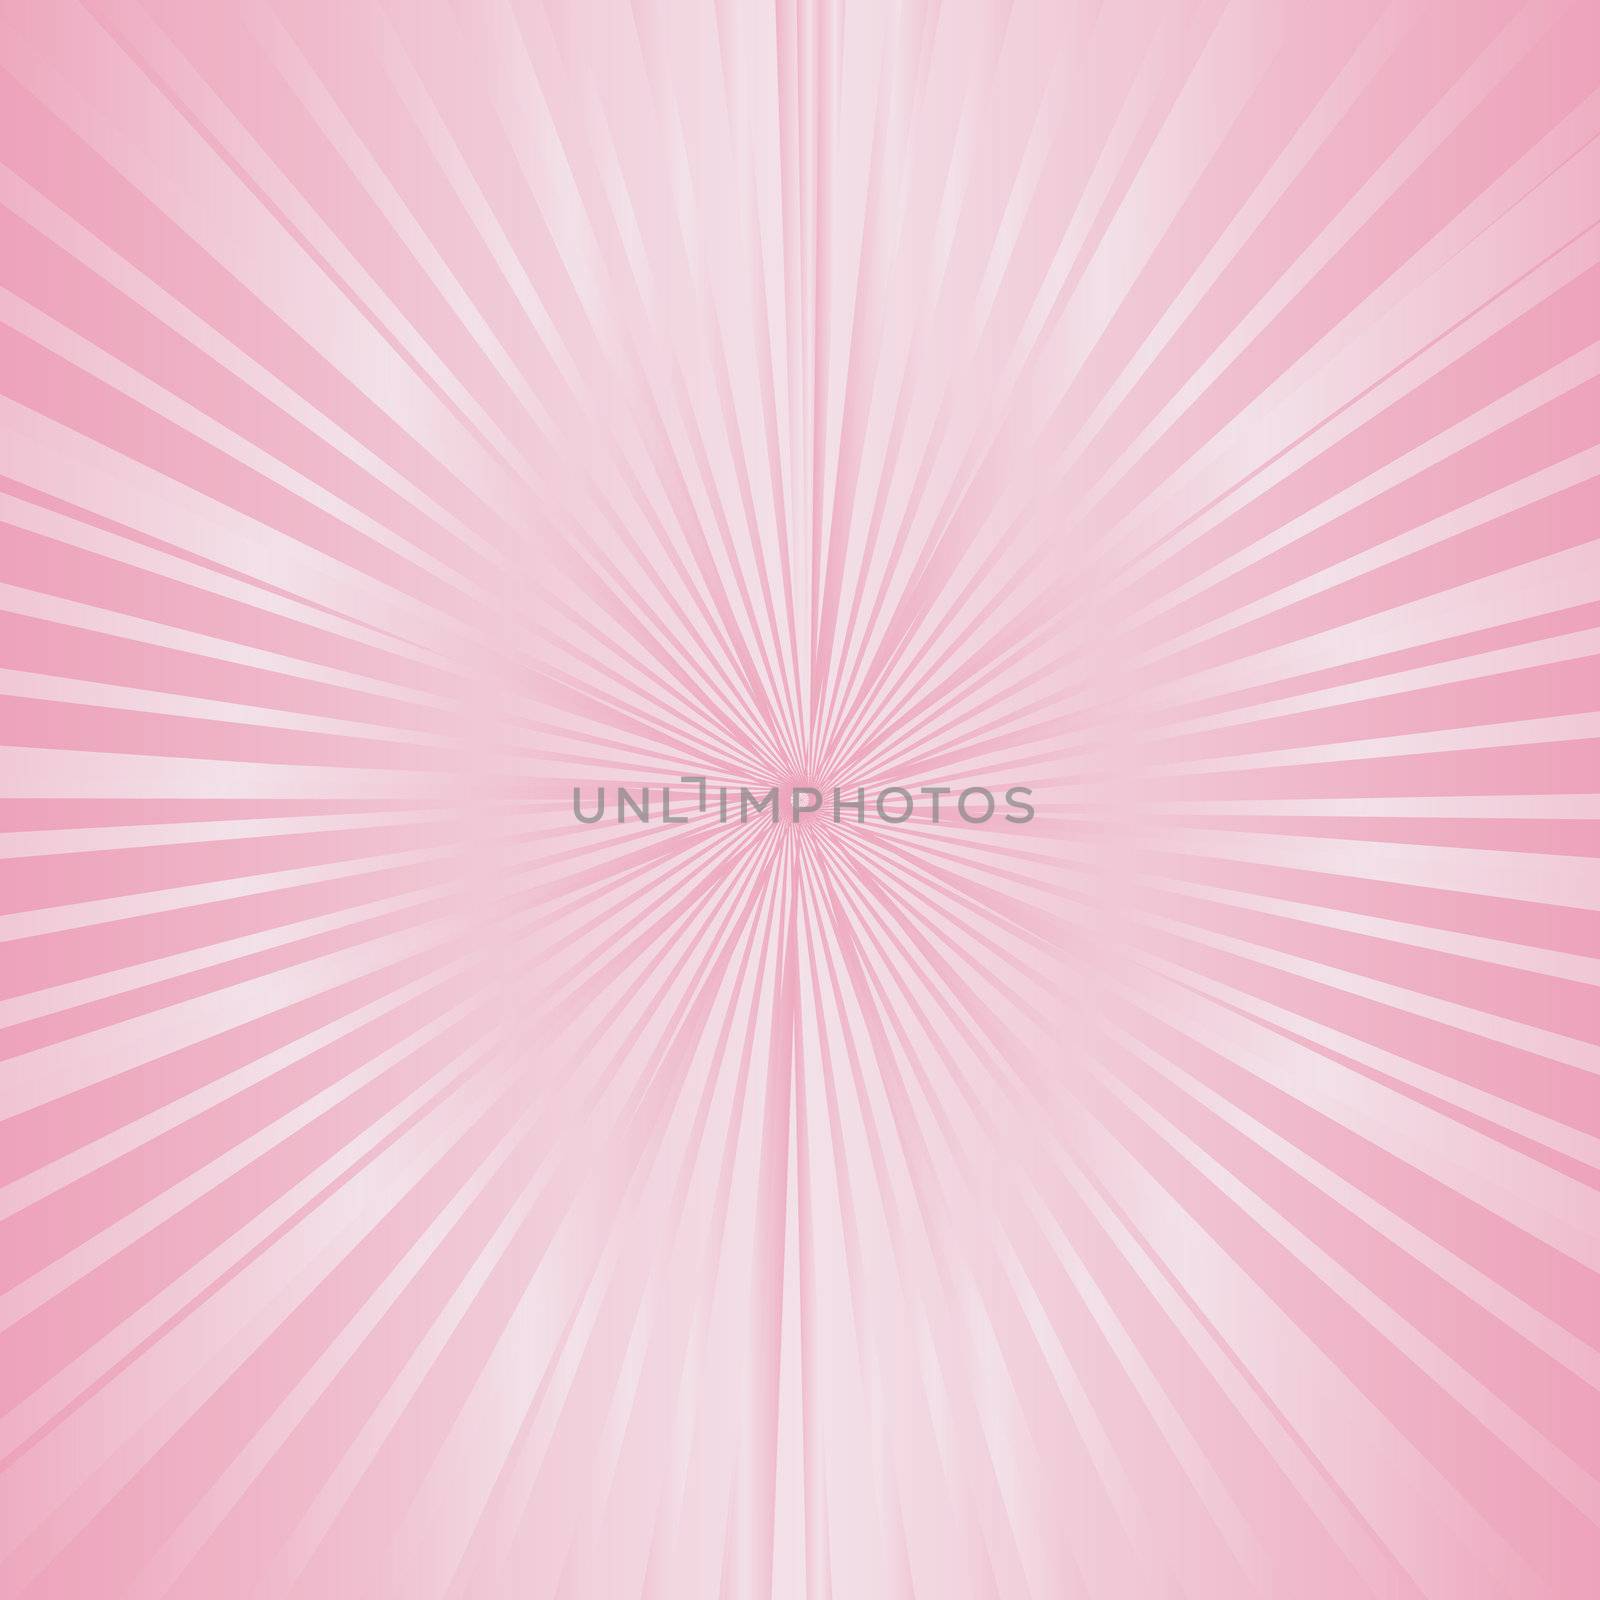 pale pink classical, retro style sunburst with a 3d effect